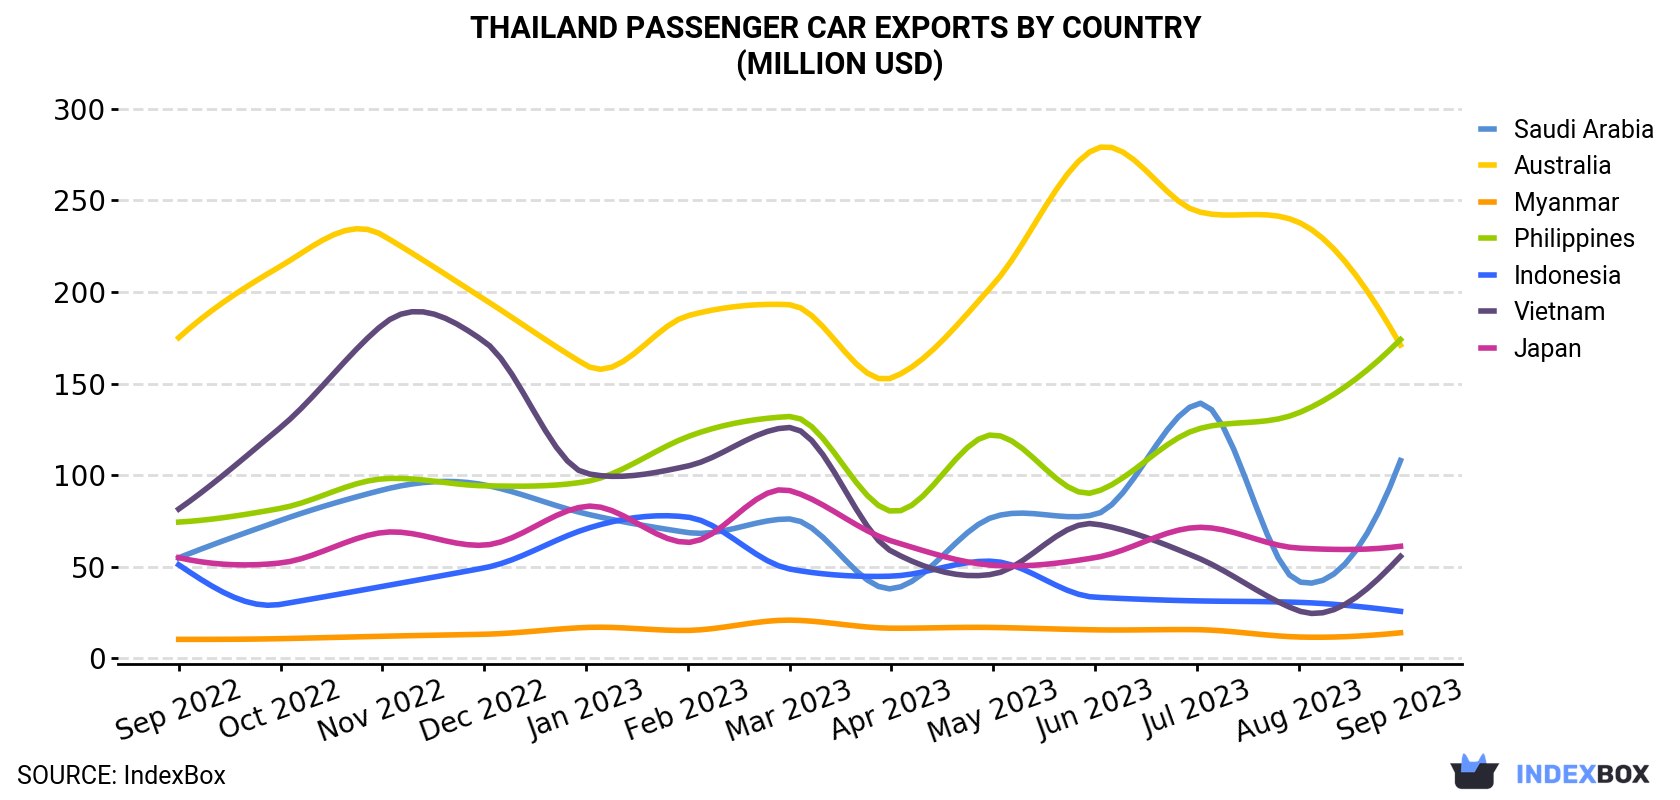 Thailand Passenger Car Exports By Country (Million USD)